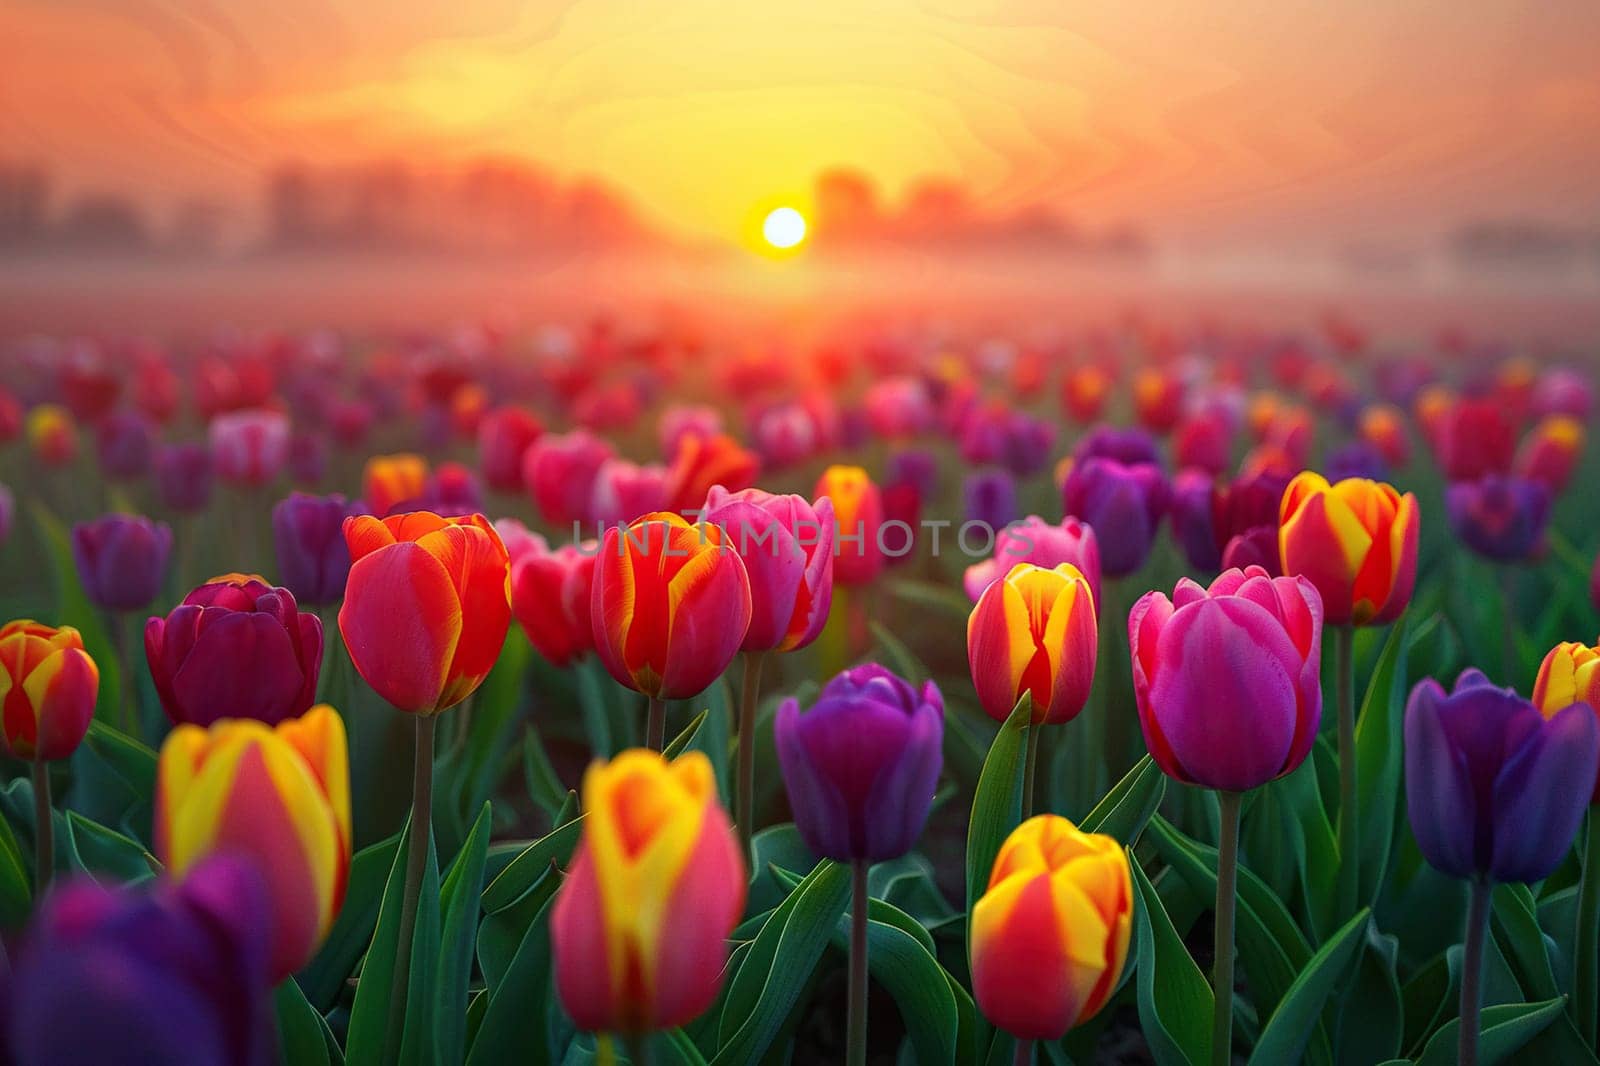 A large beautiful plantation of multi-colored tulips in the rays of sunset.